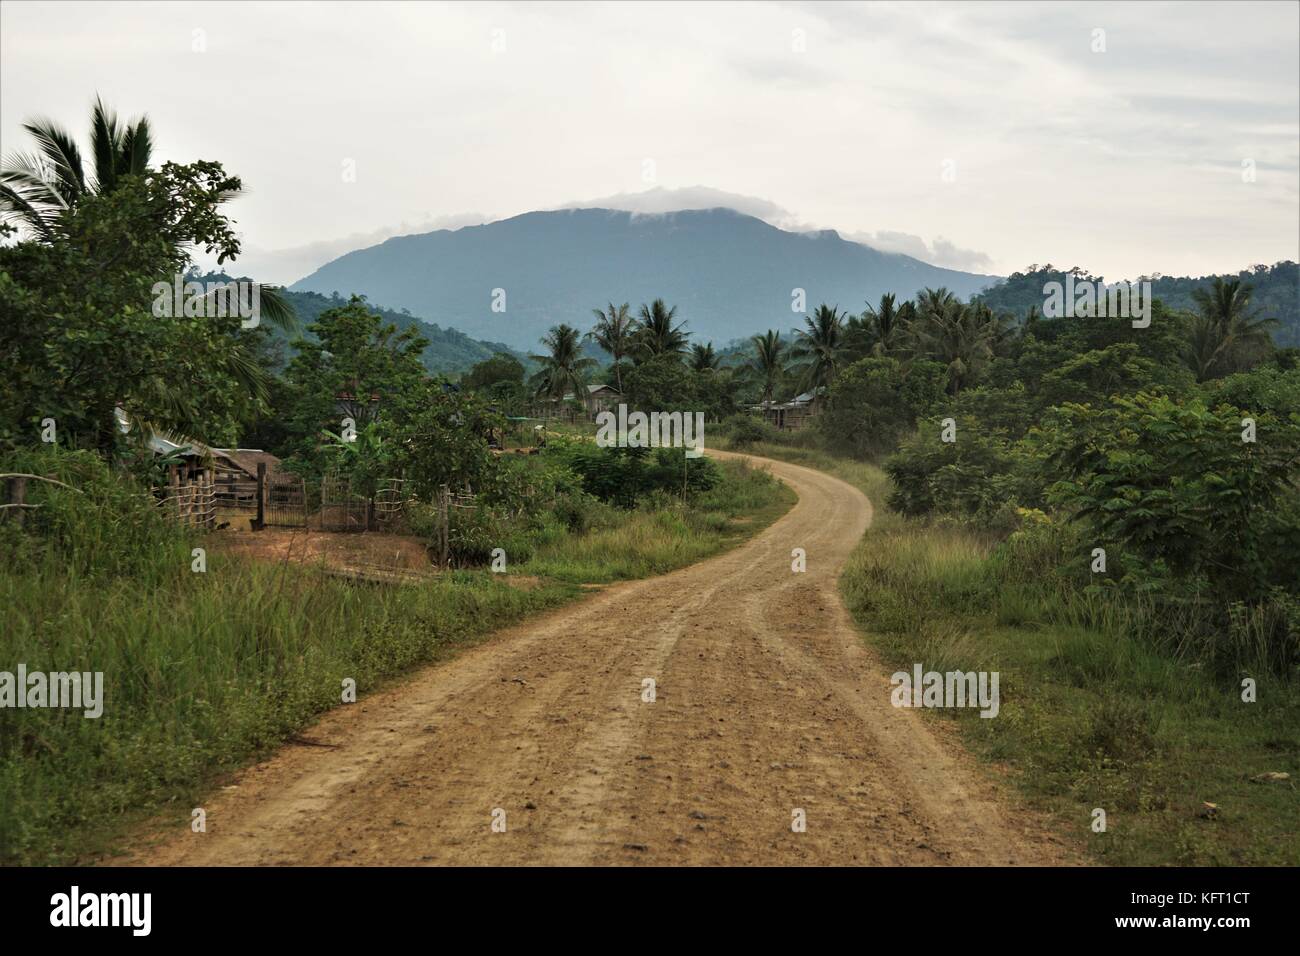 Cambodian Landscape with Palm Trees / Coconut Trees and a Mountain Stock Photo